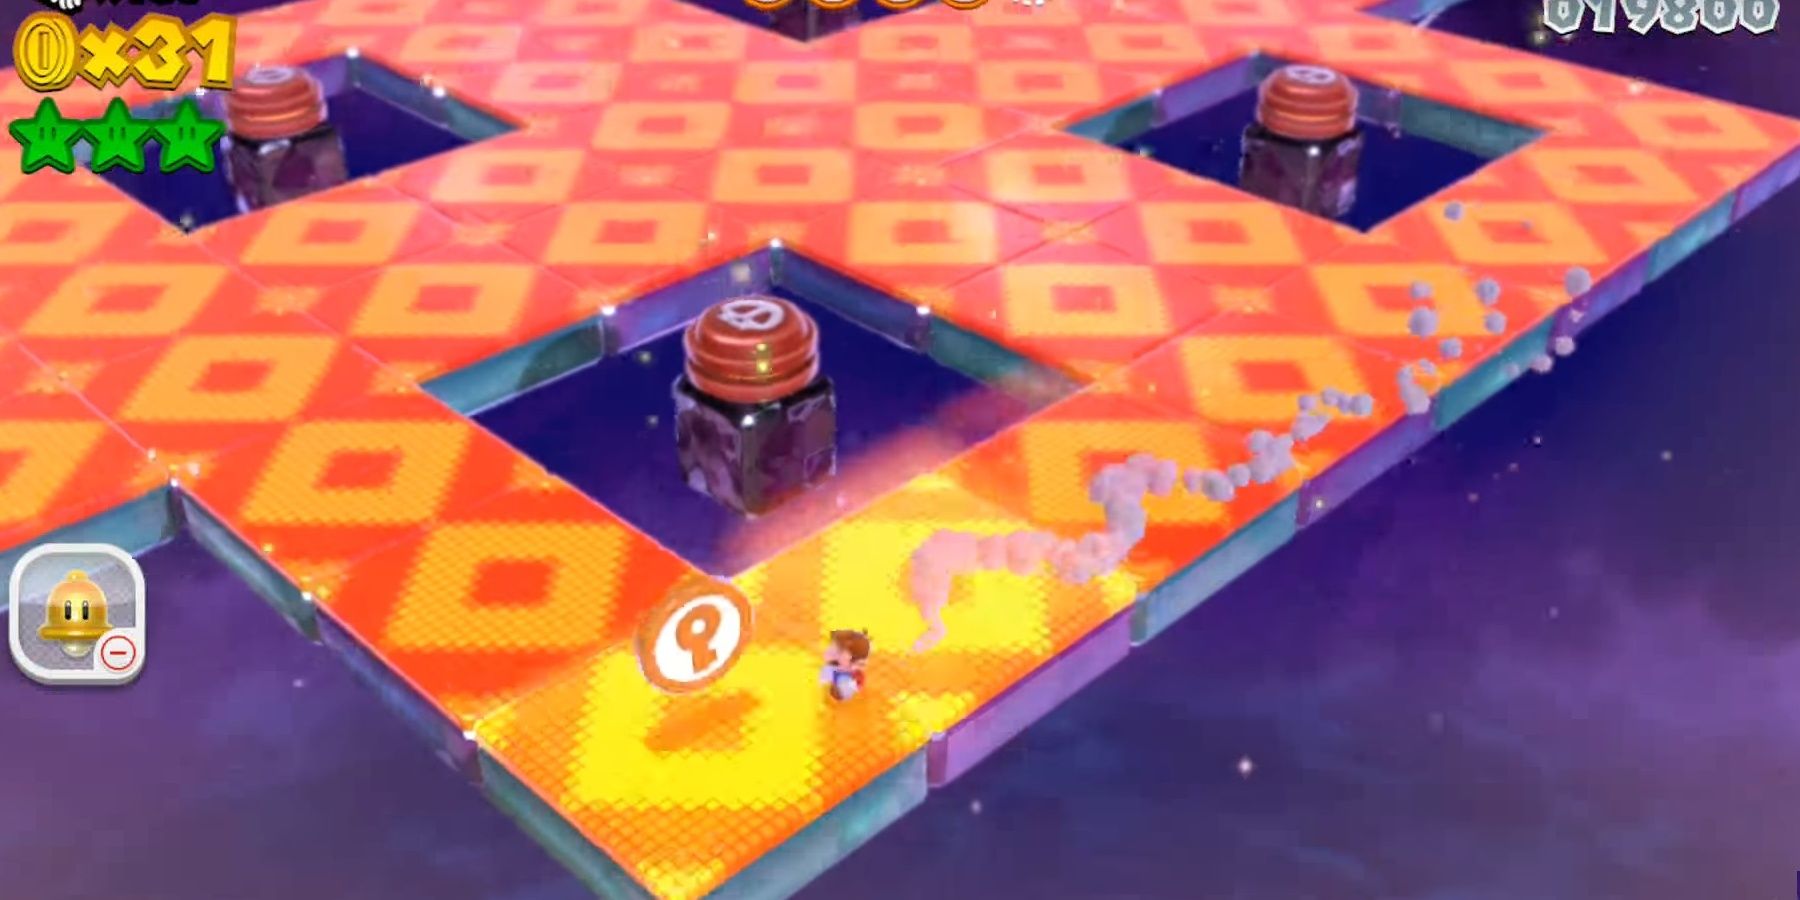 Super Mario 3-D World Mario In The Final Section Of Champion's Road 